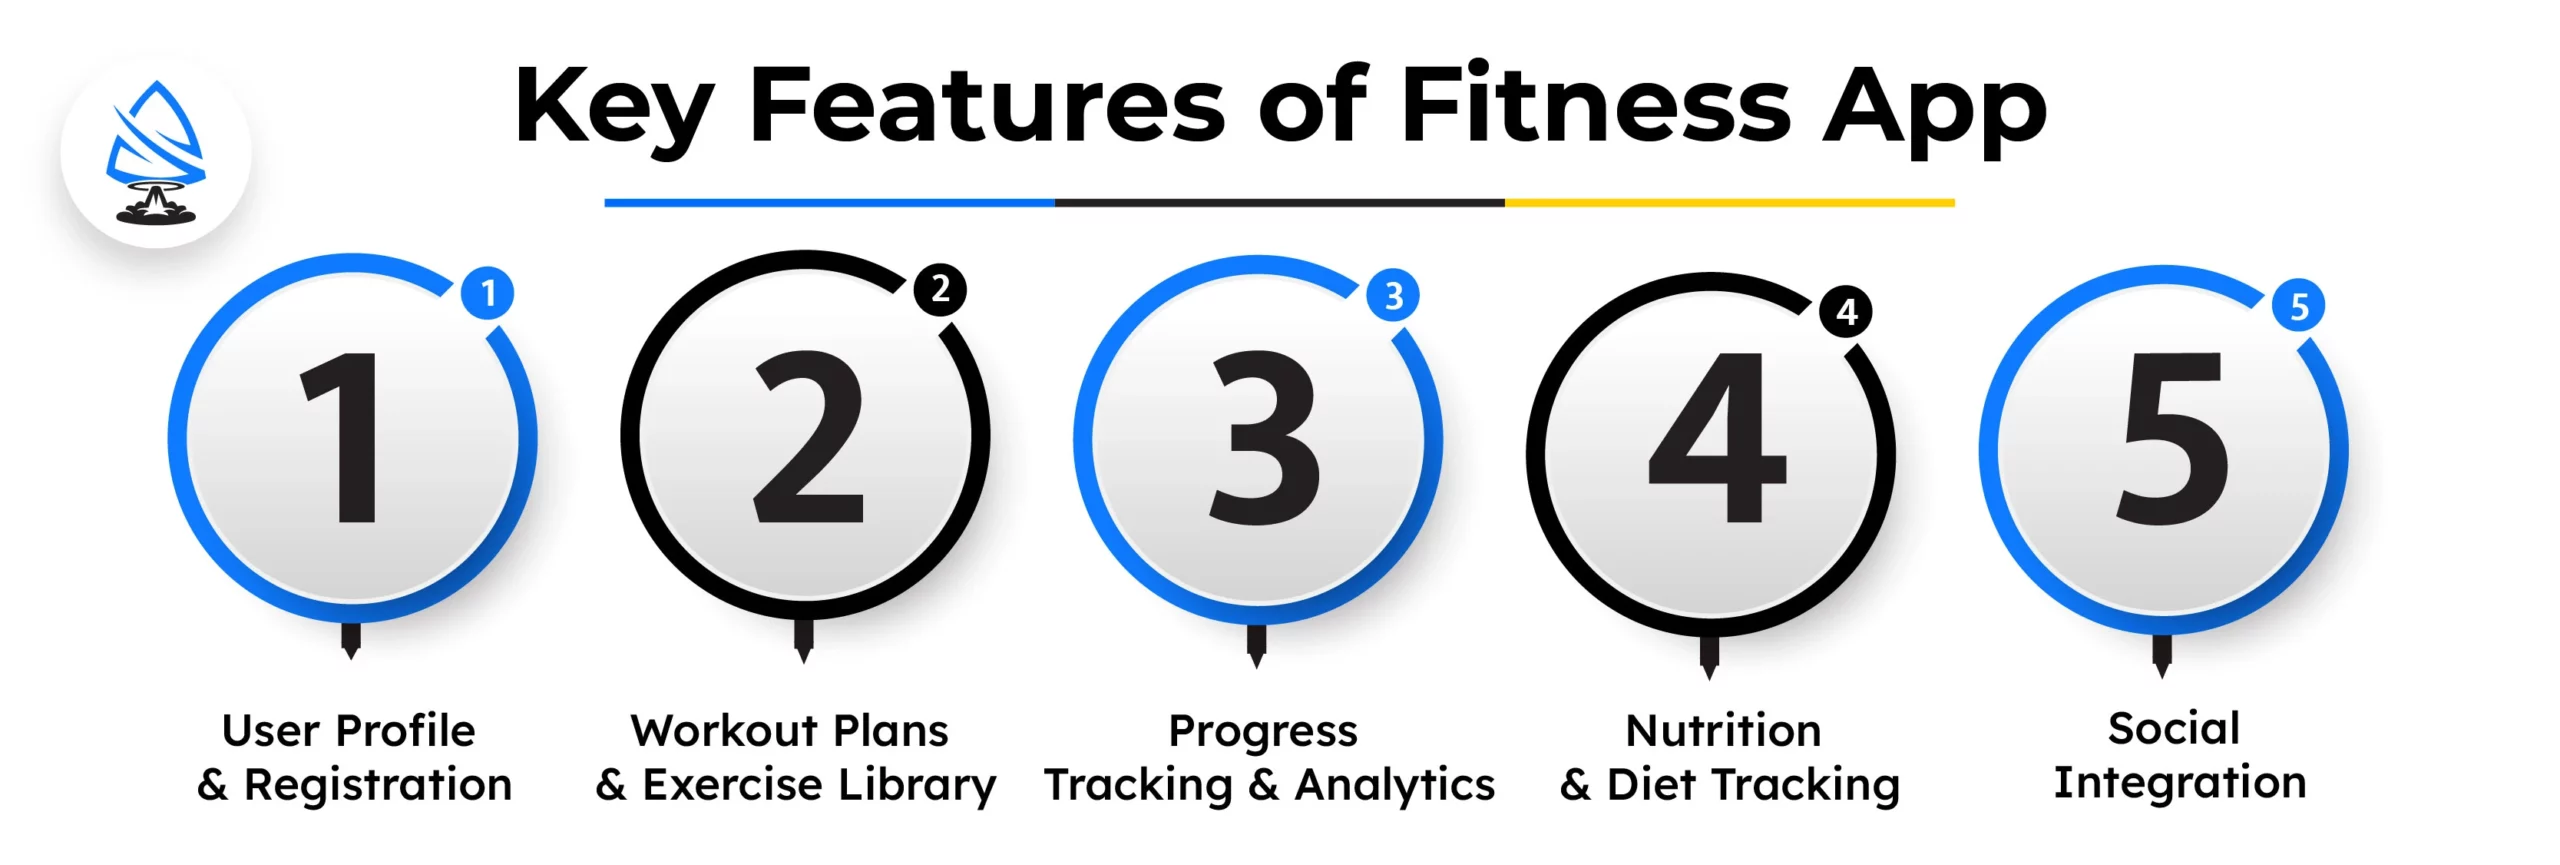 Key Features of Fitness App